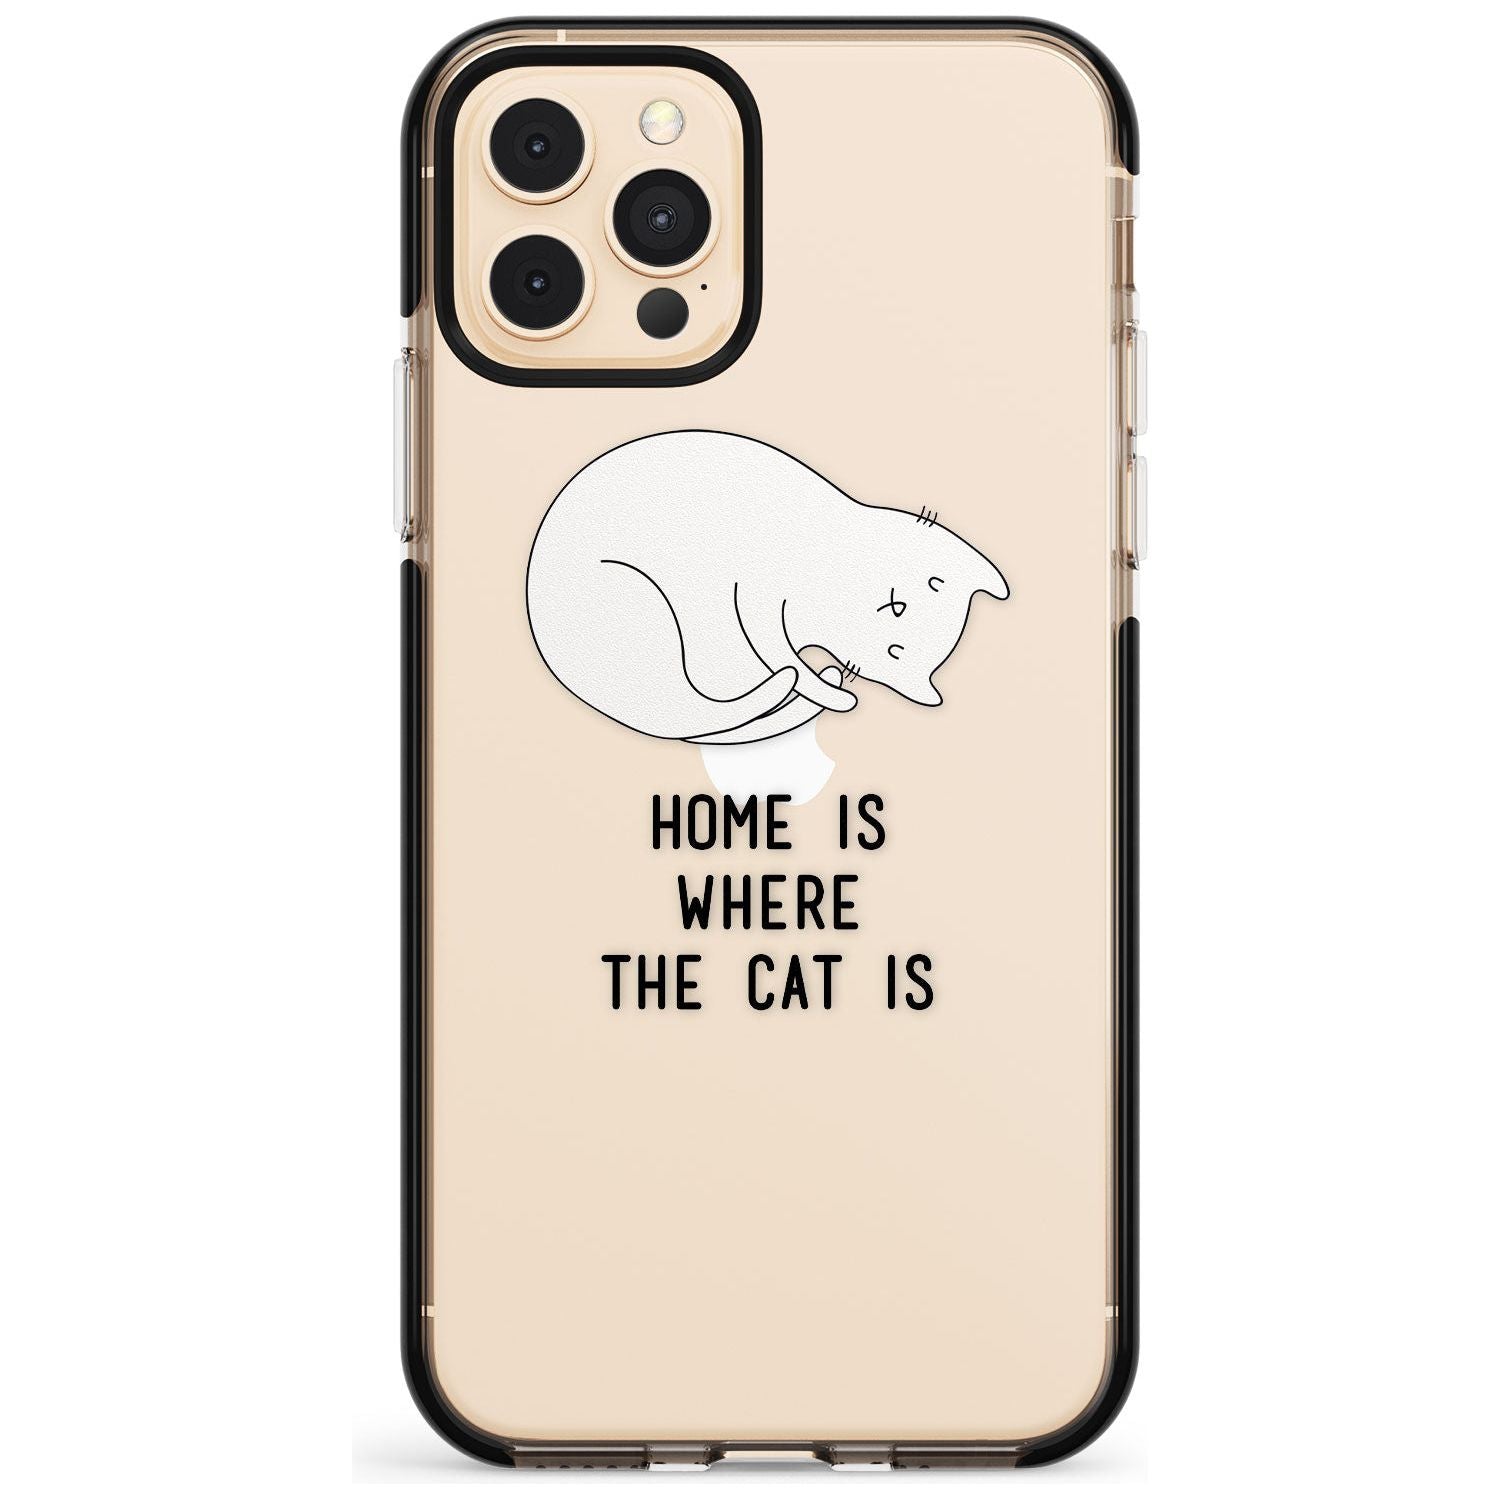 Home Is Where the Cat is Pink Fade Impact Phone Case for iPhone 11